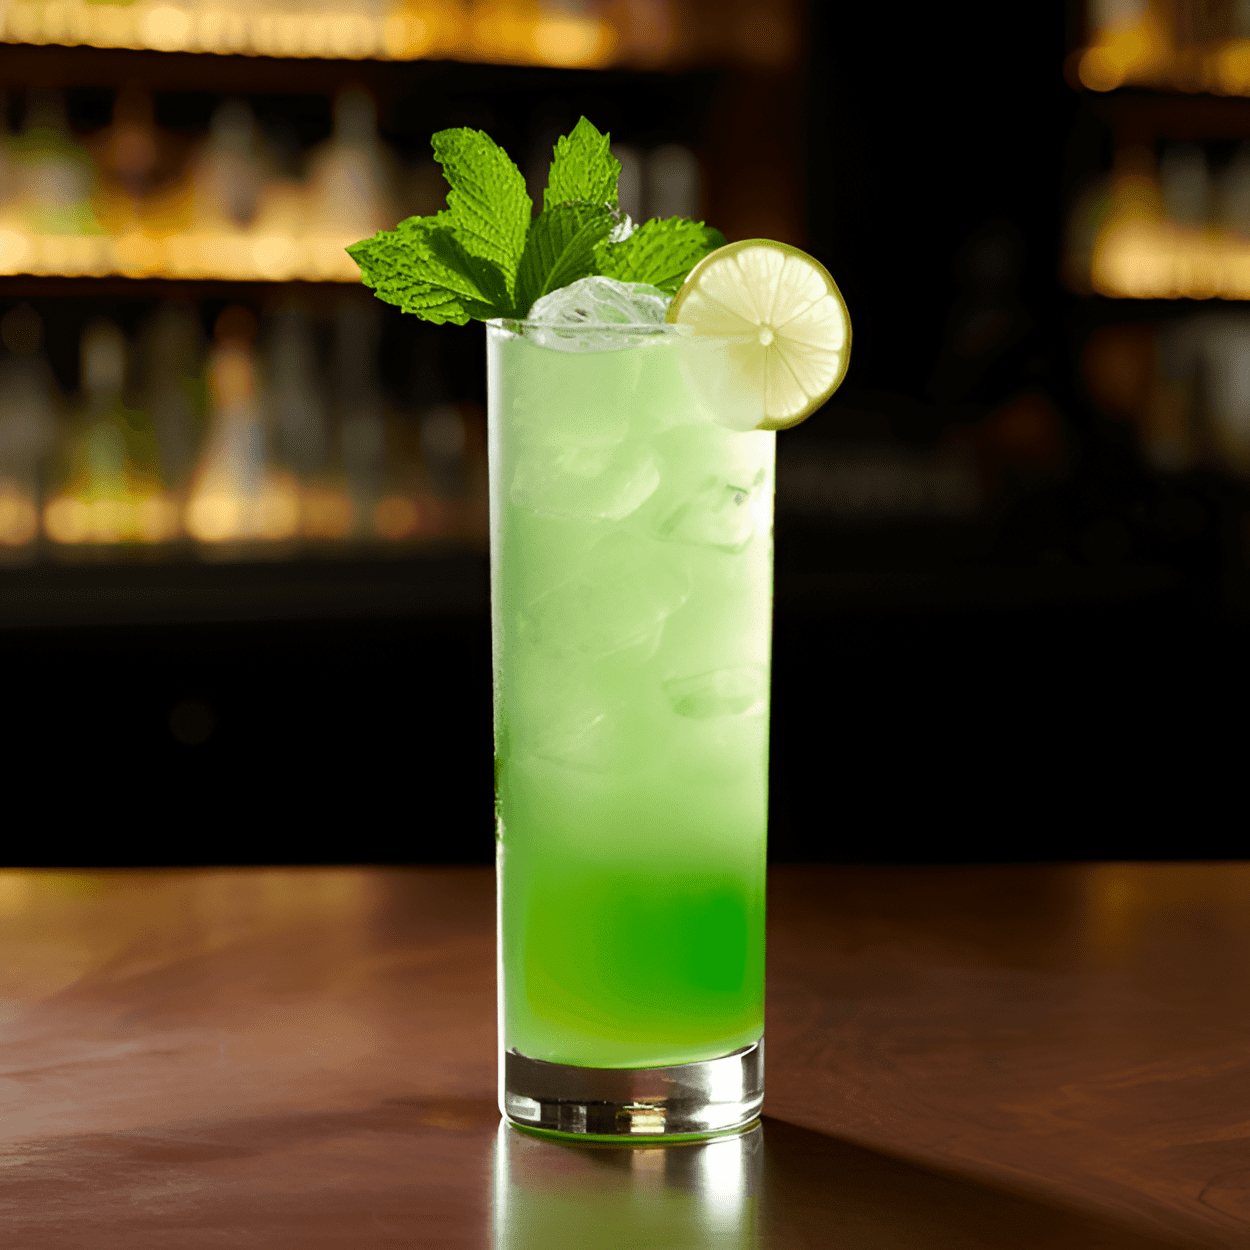 Cabbage Creeper Cocktail Recipe - The Cabbage Creeper has a unique, refreshing taste. It's slightly sweet, with a hint of sourness from the lime. The cabbage gives it a crisp, vegetal note, while the gin adds a juniper-forward flavor. It's a light, balanced cocktail with a surprising depth of flavor.